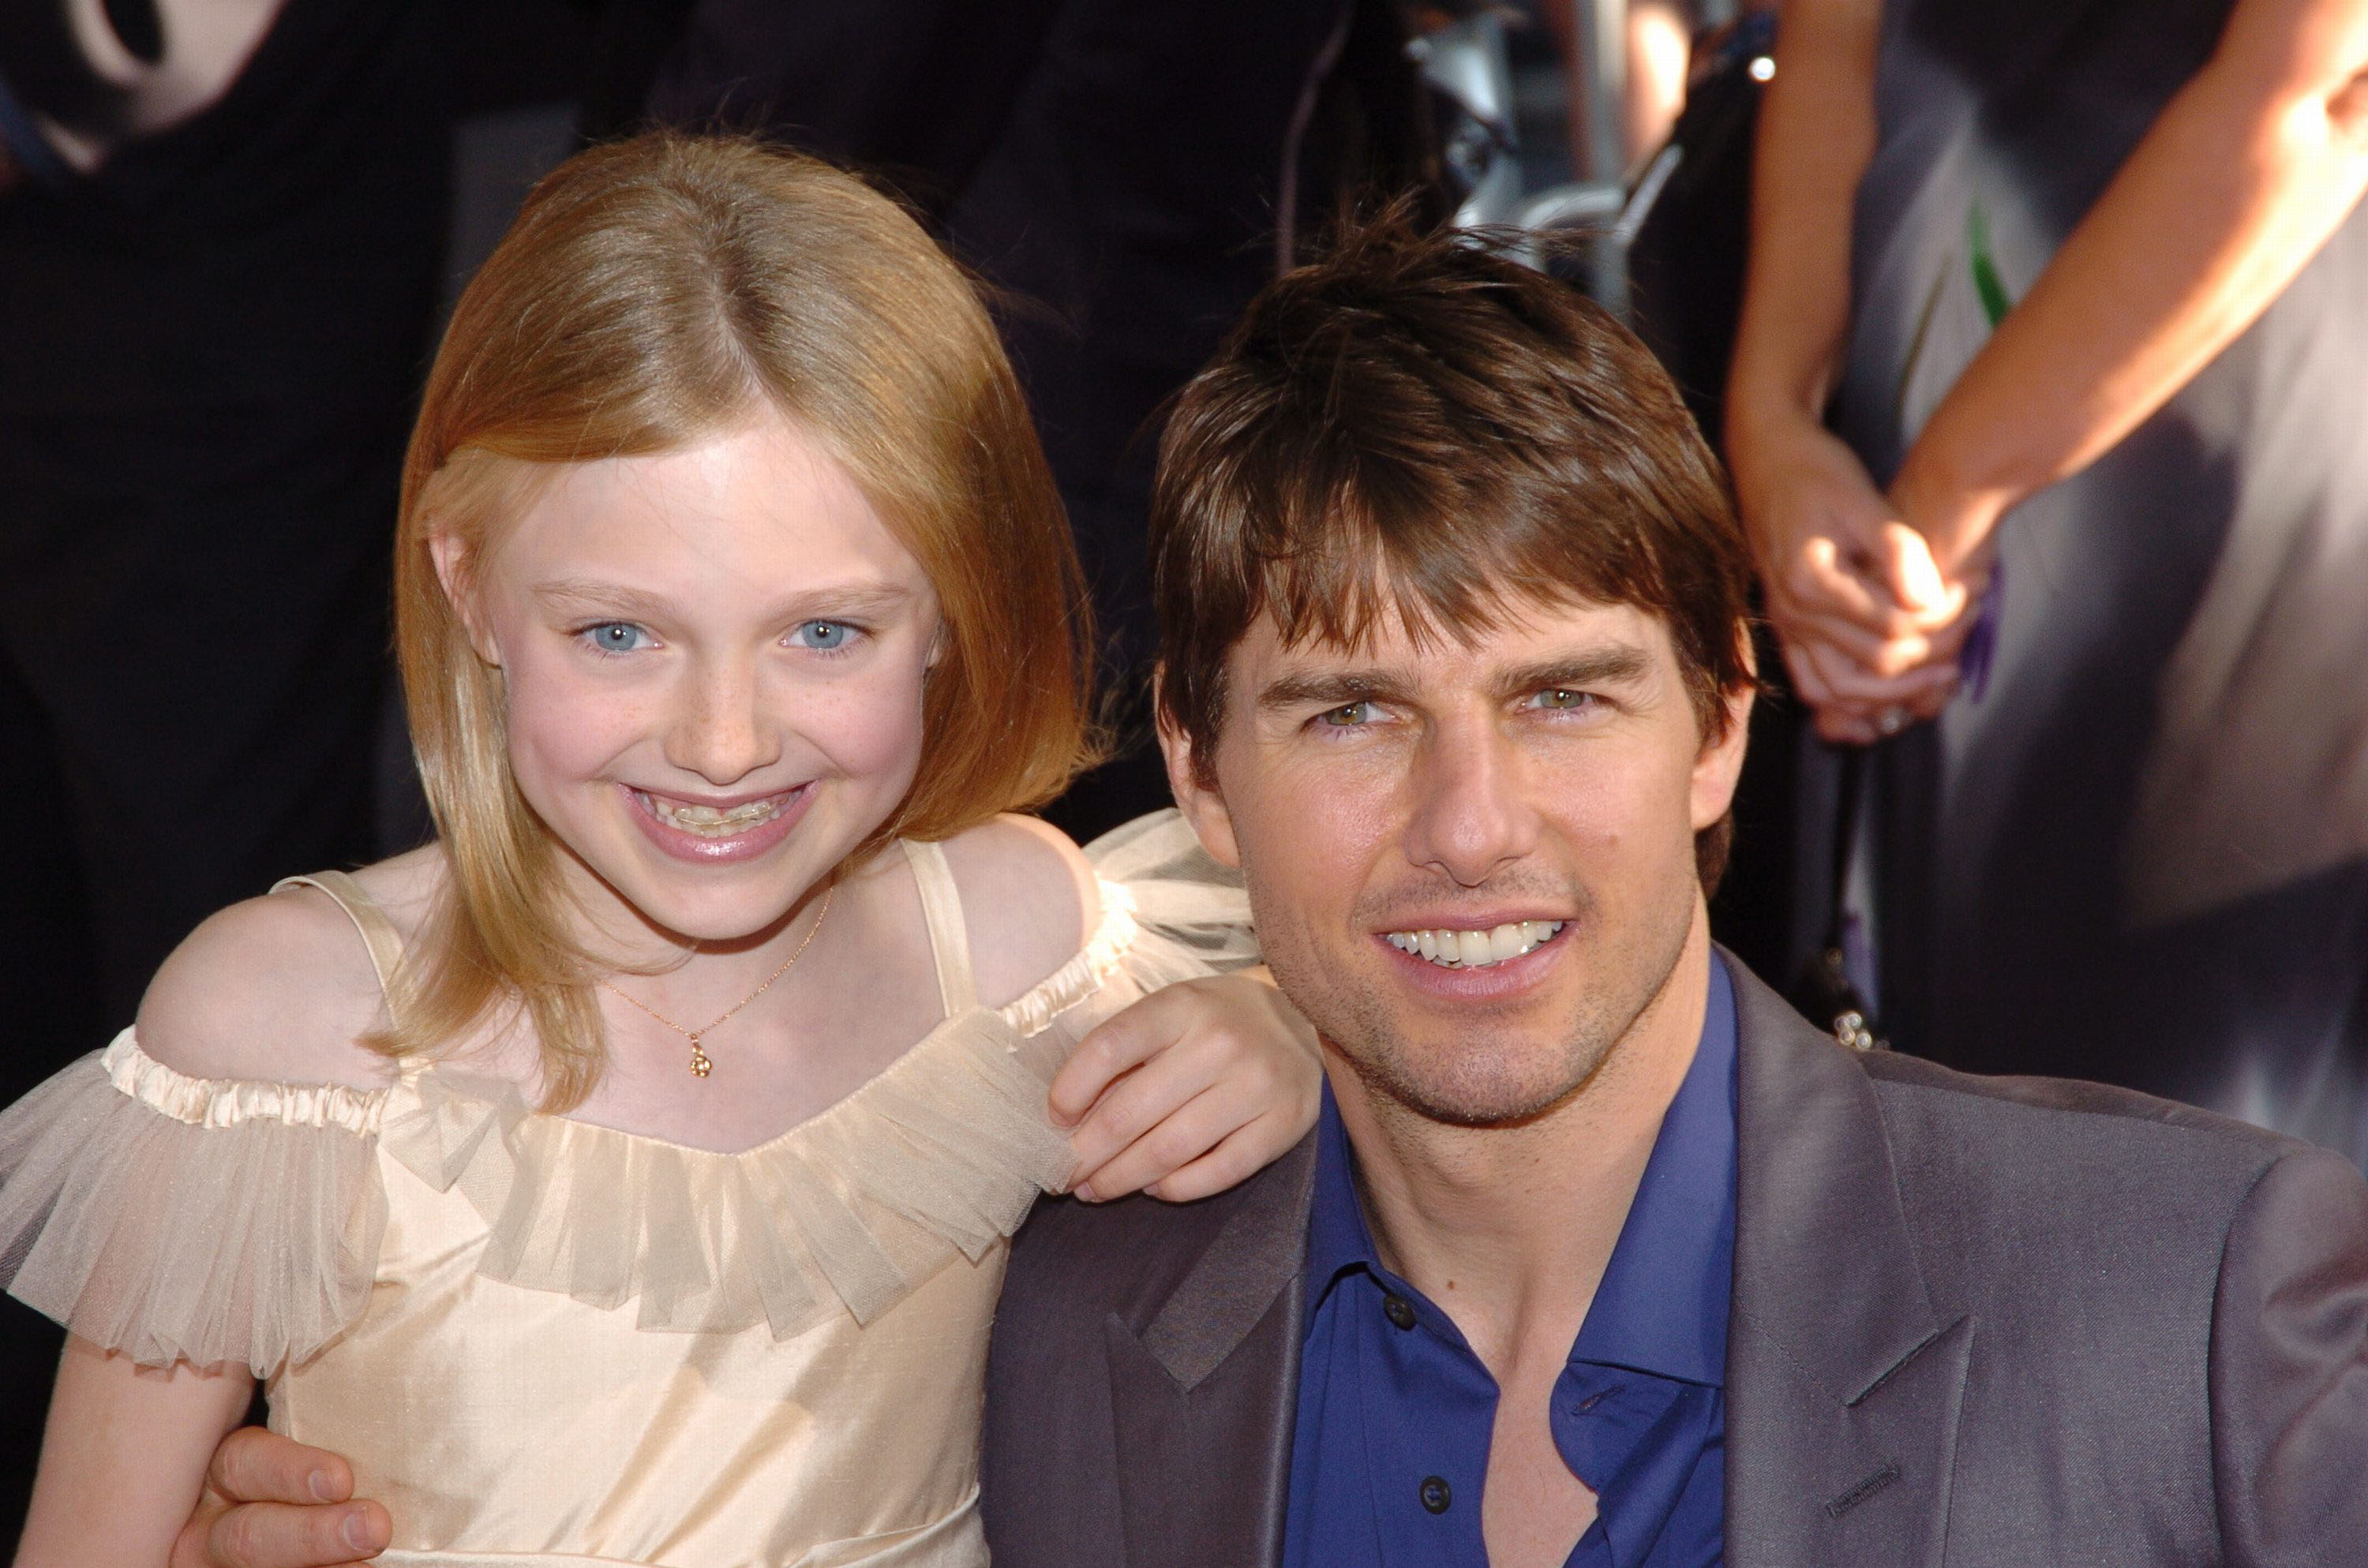 Tom Cruise and Dakota Fanning attend the "War Of The Worlds" premiere on June 23, 2005 in New York City | Source: Getty Images